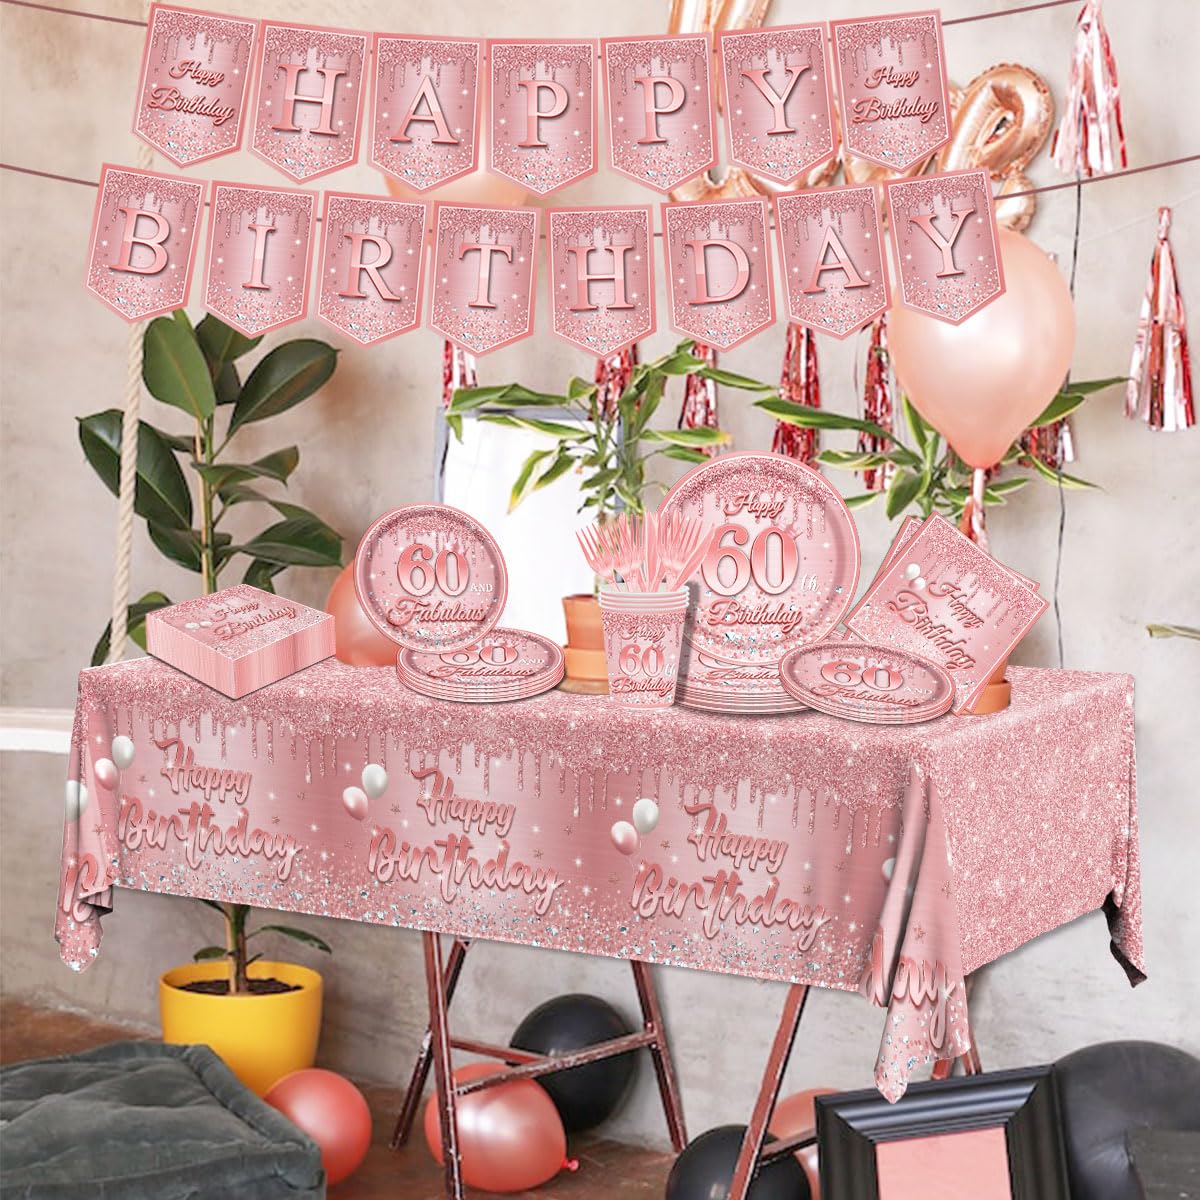 60th Birthday Rose Gold Supplies,142pcs Glitter Pink Rose Gold Tableware Include 60th Birthday Plates and Napkins Cups,Rose Gold Tablecloth Happy Birthday Banner for Women Happy 40th Birthday